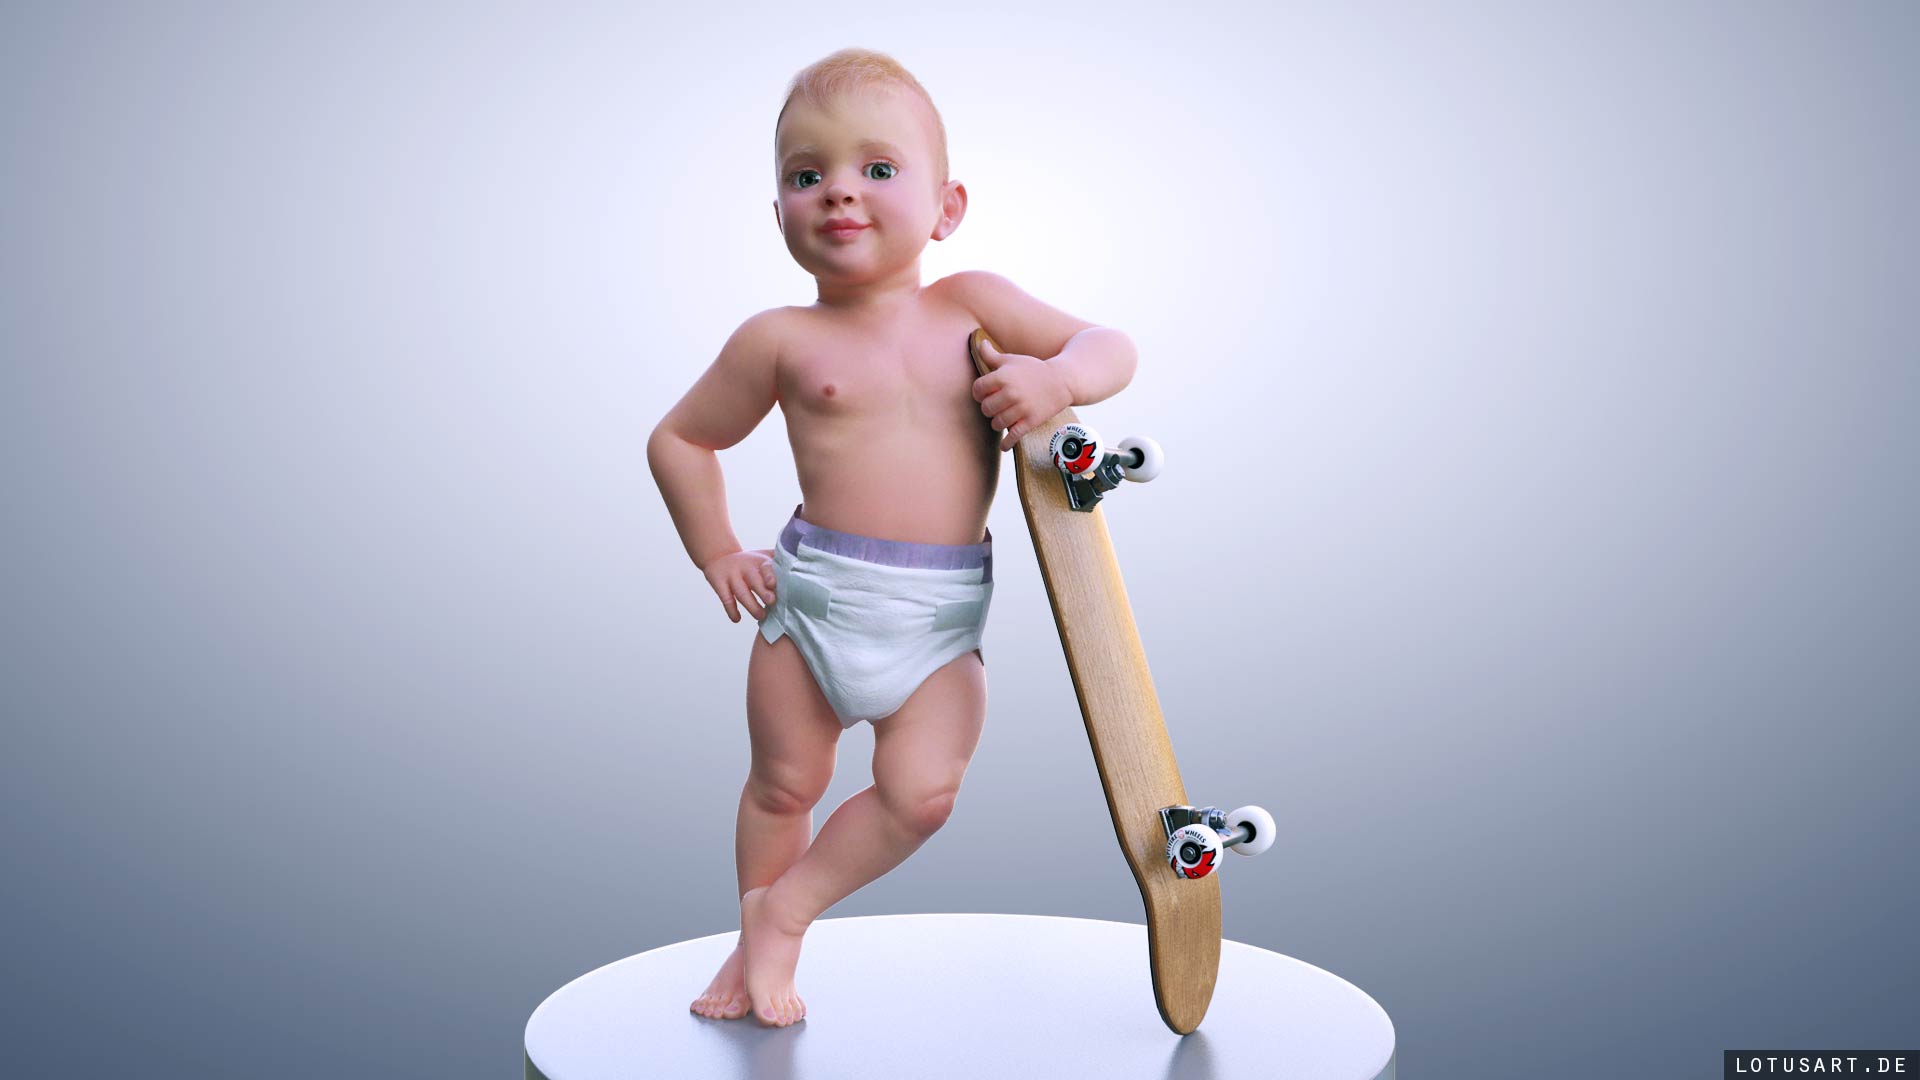 3D_baby_lotusart_character_animation 3D VISUALISIERUNG | ANIMATION | CG CHARACTER STUDIO